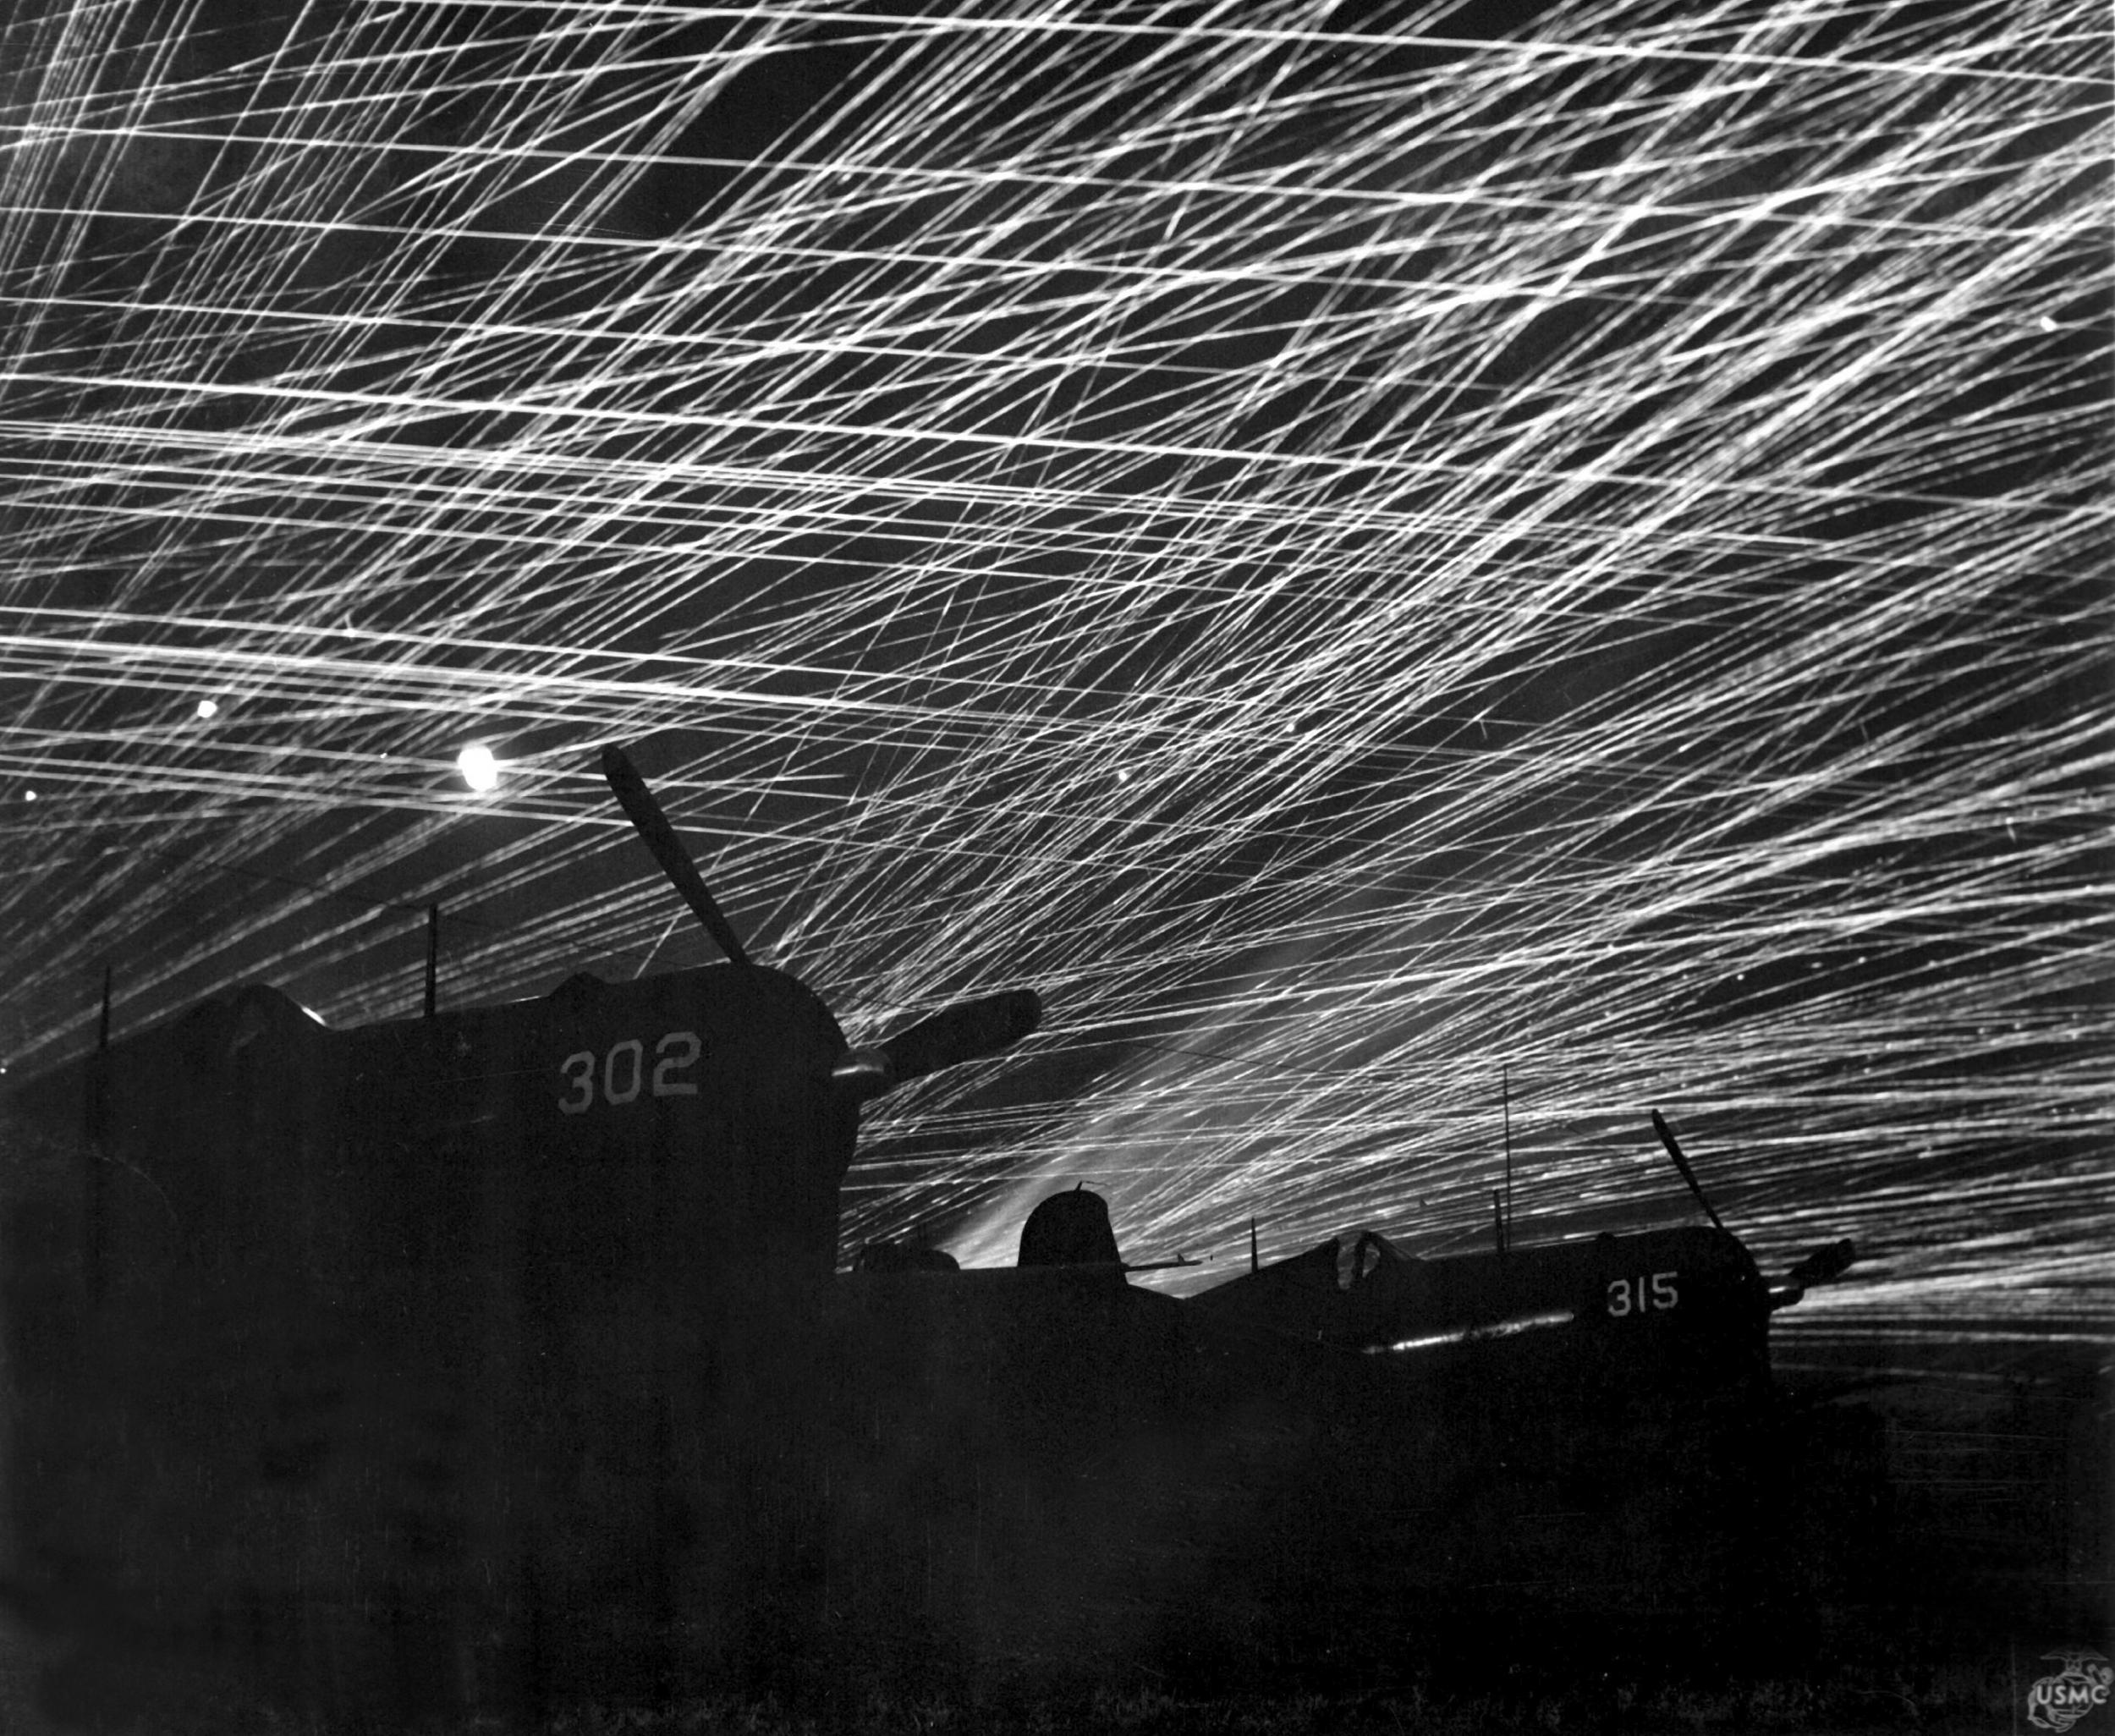 Japanese night raiders are greeted with a flak of anti-aircraft fire by the Marine defenders of Yontan airfield, on Okinawa, 1945